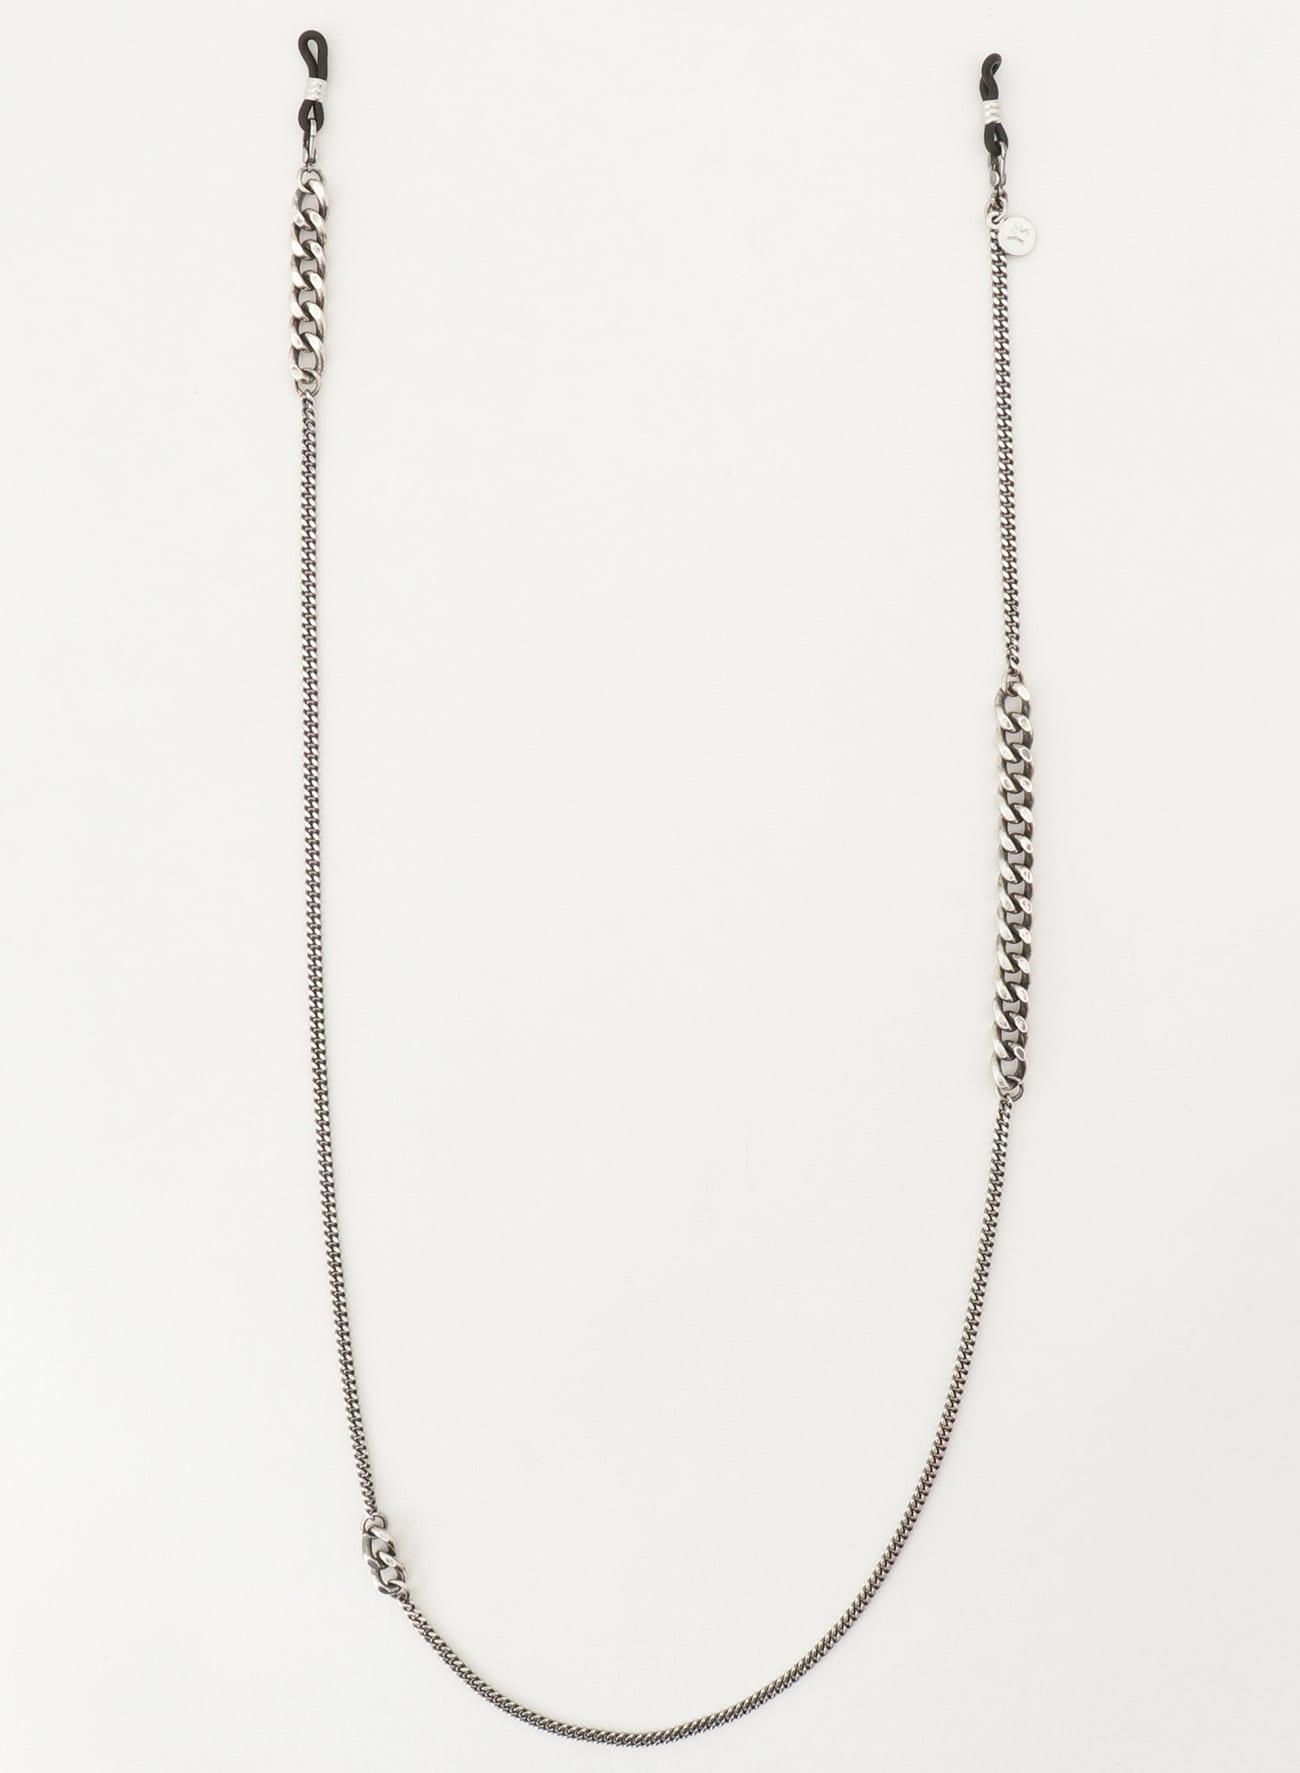 SILVER 925 COMBI 3 WAYS CHAIN NECKLACE